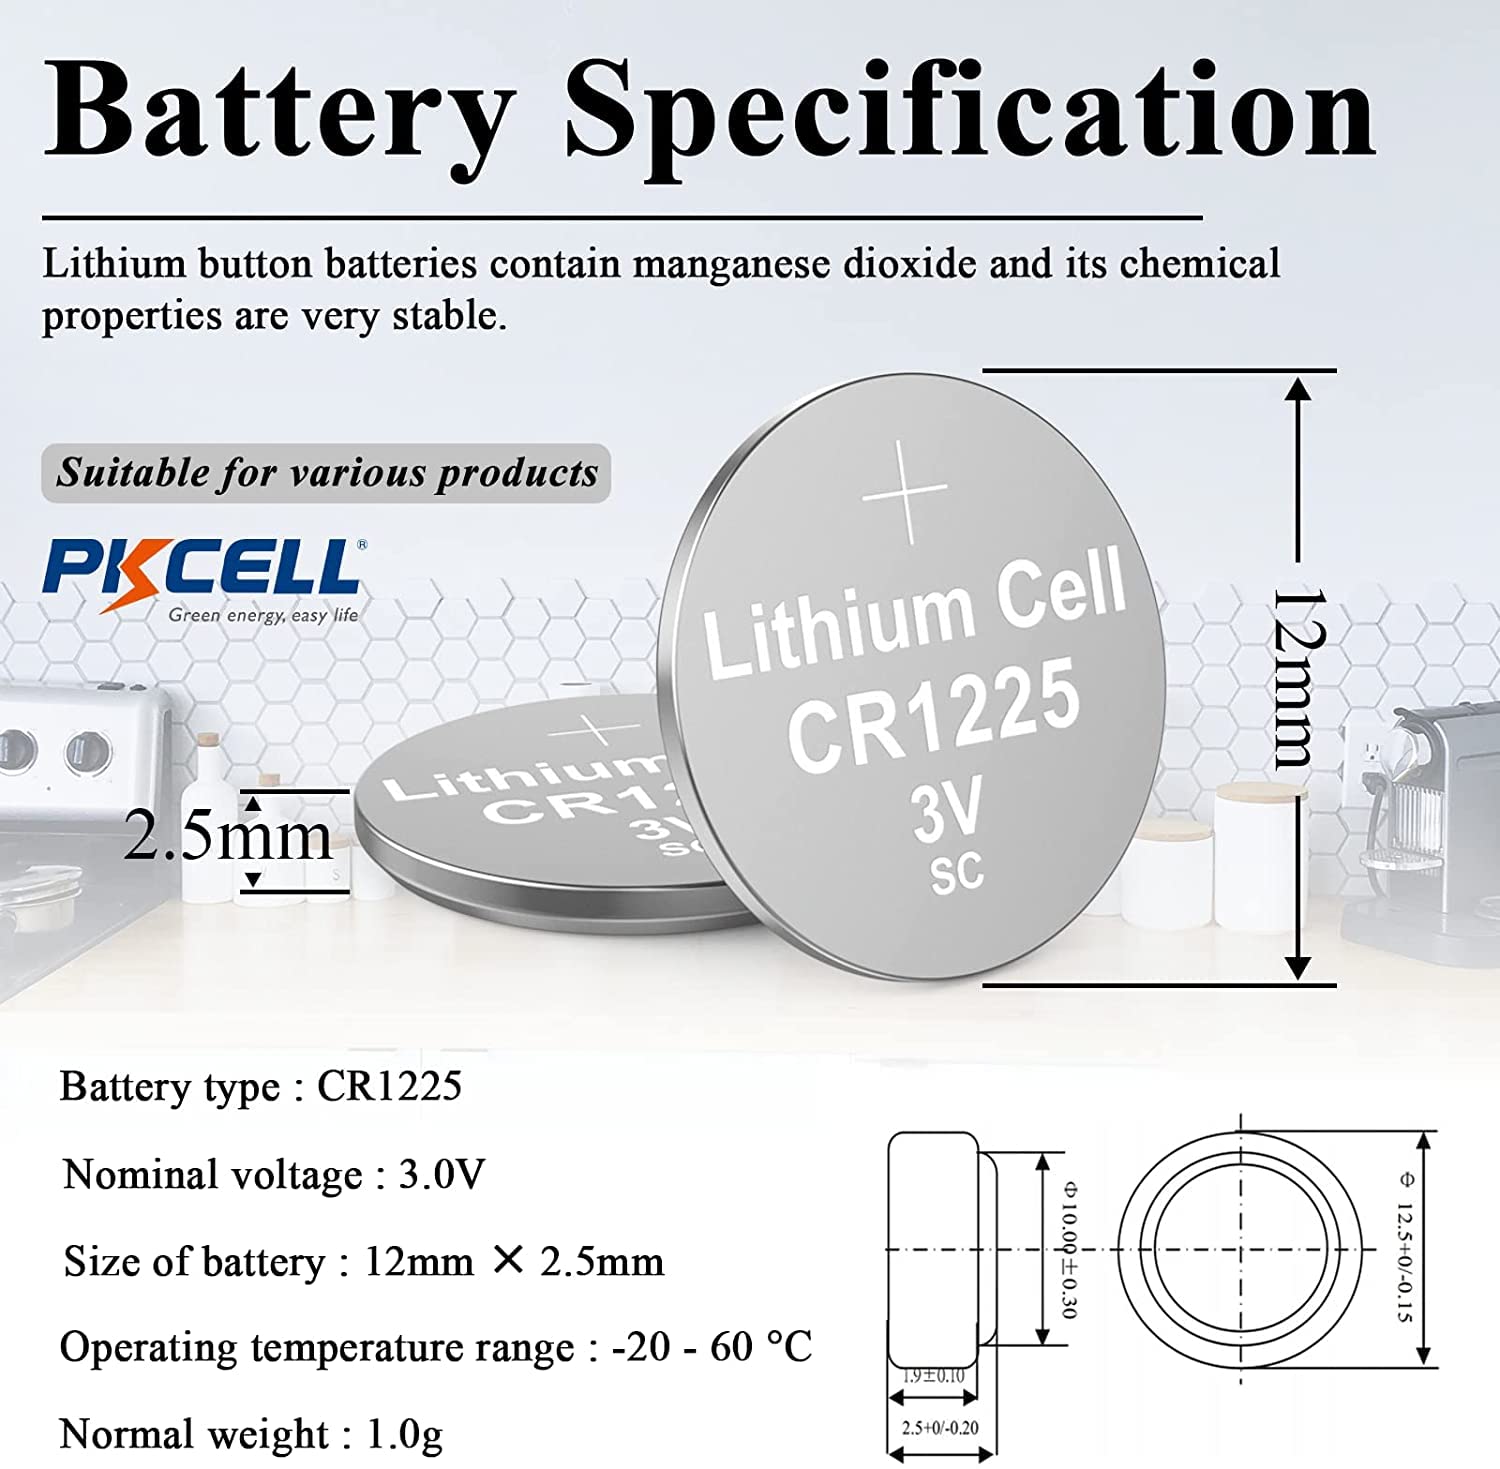 PKCELL CR1225 Battery 3V Lithium Button Coin Cell for Car Key 5-Year Shelf Life (5 Counts)